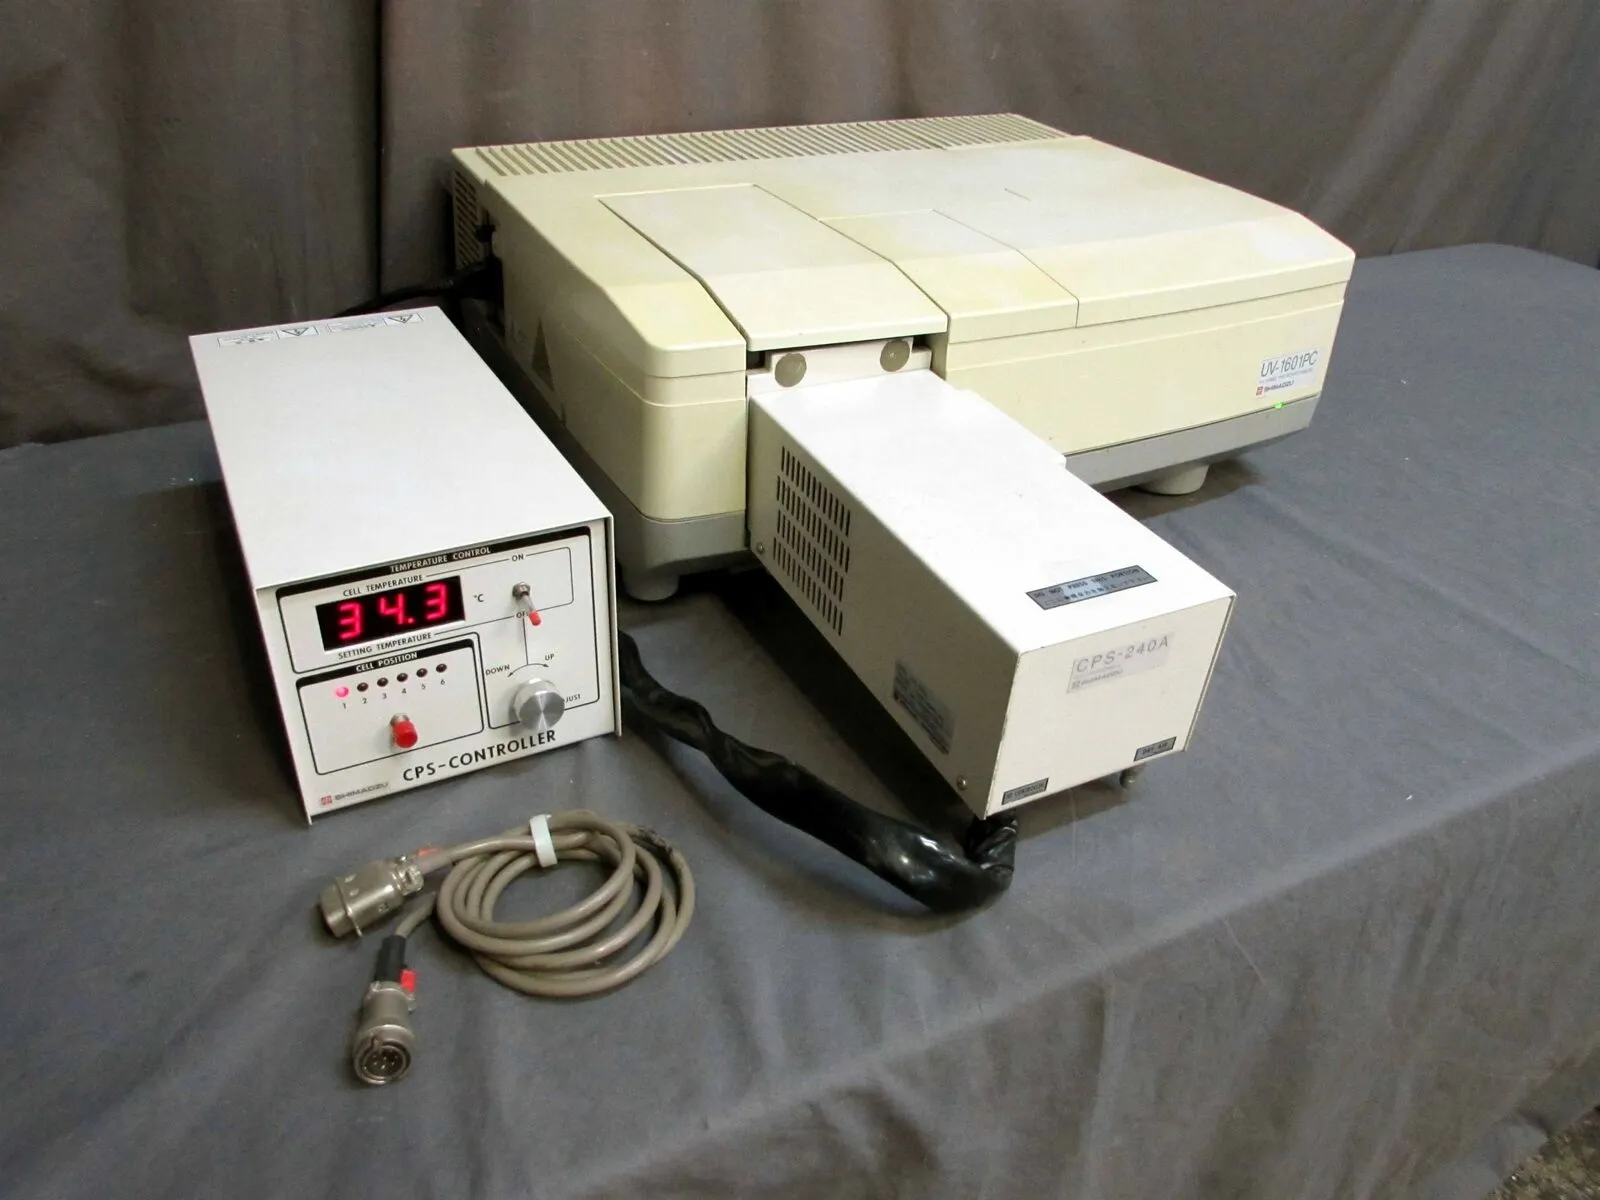 Shimadzu UV-1601PC UV-Visible Spectrometer w/ CPS-240A Controller + Positioner